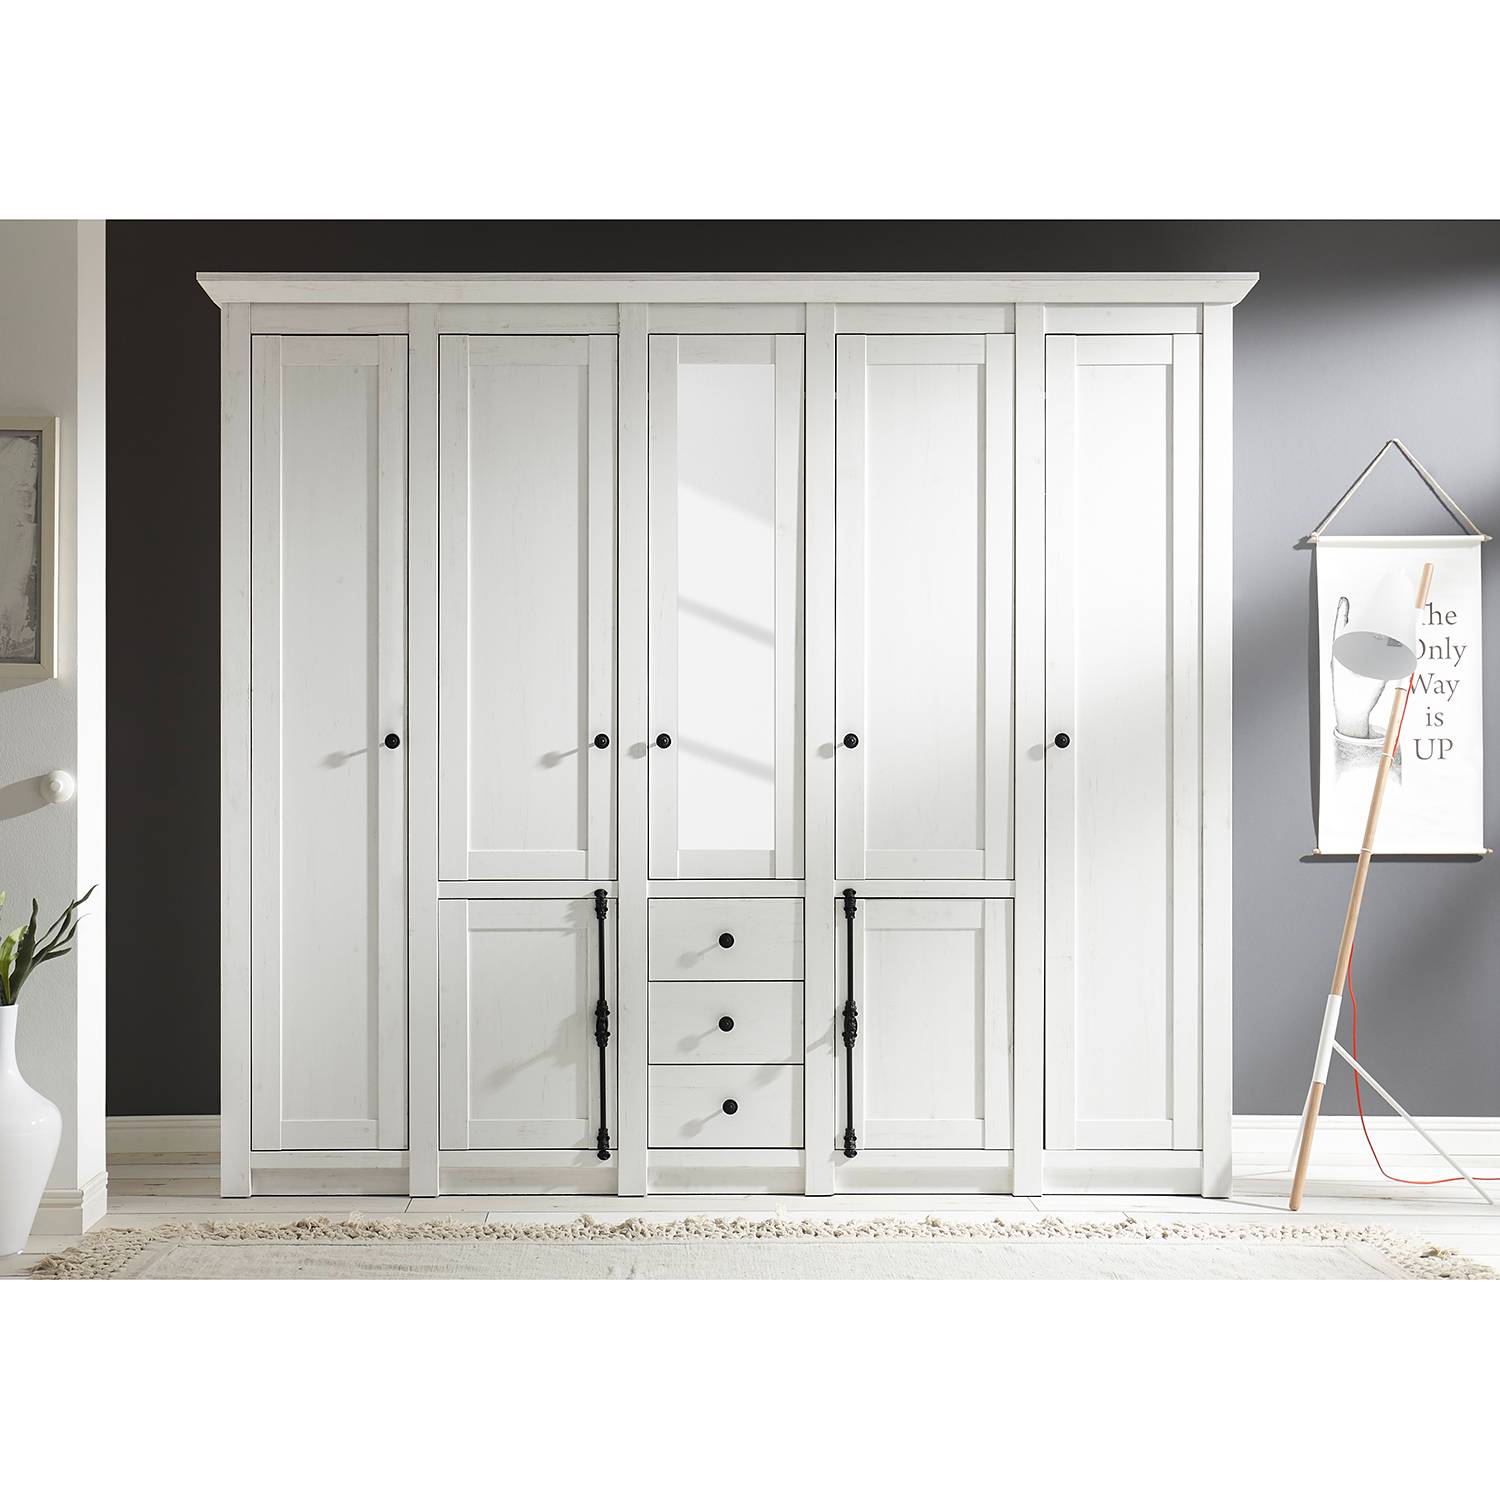 Image of Armoire Geestland 000000001000132105